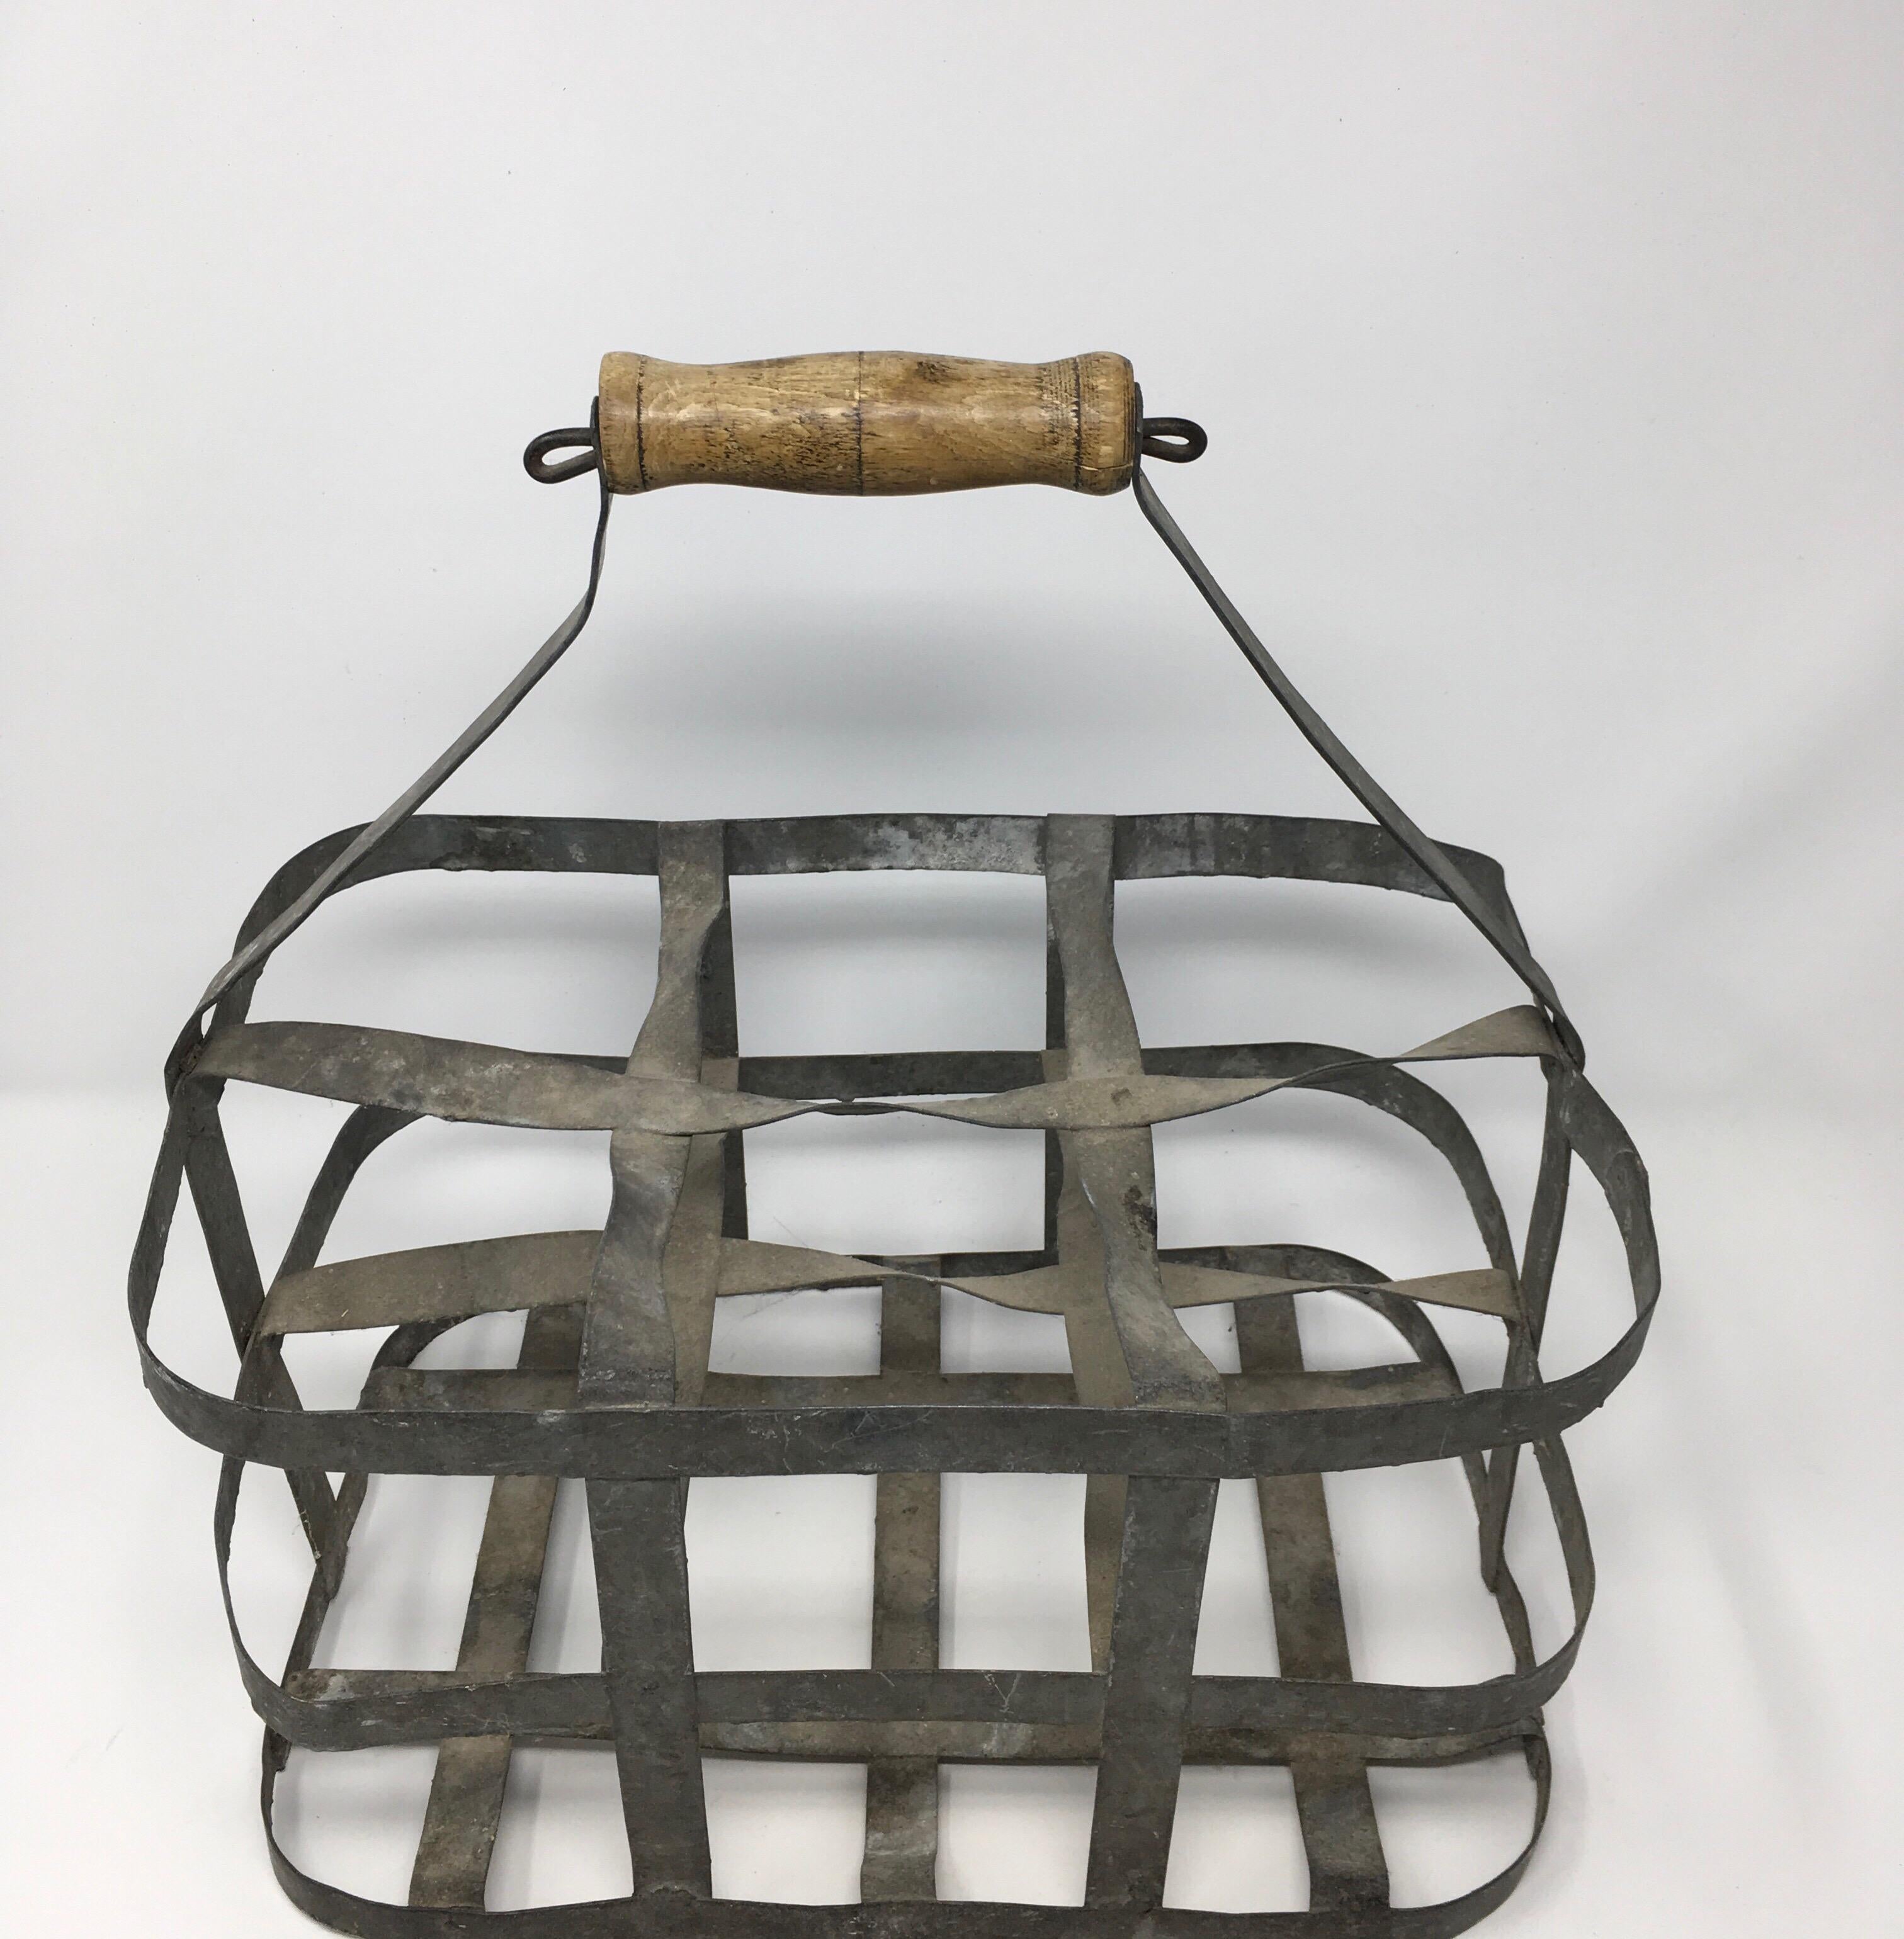 Metal Early 20th Century French Six Bottle Wine Carrier Basket from France